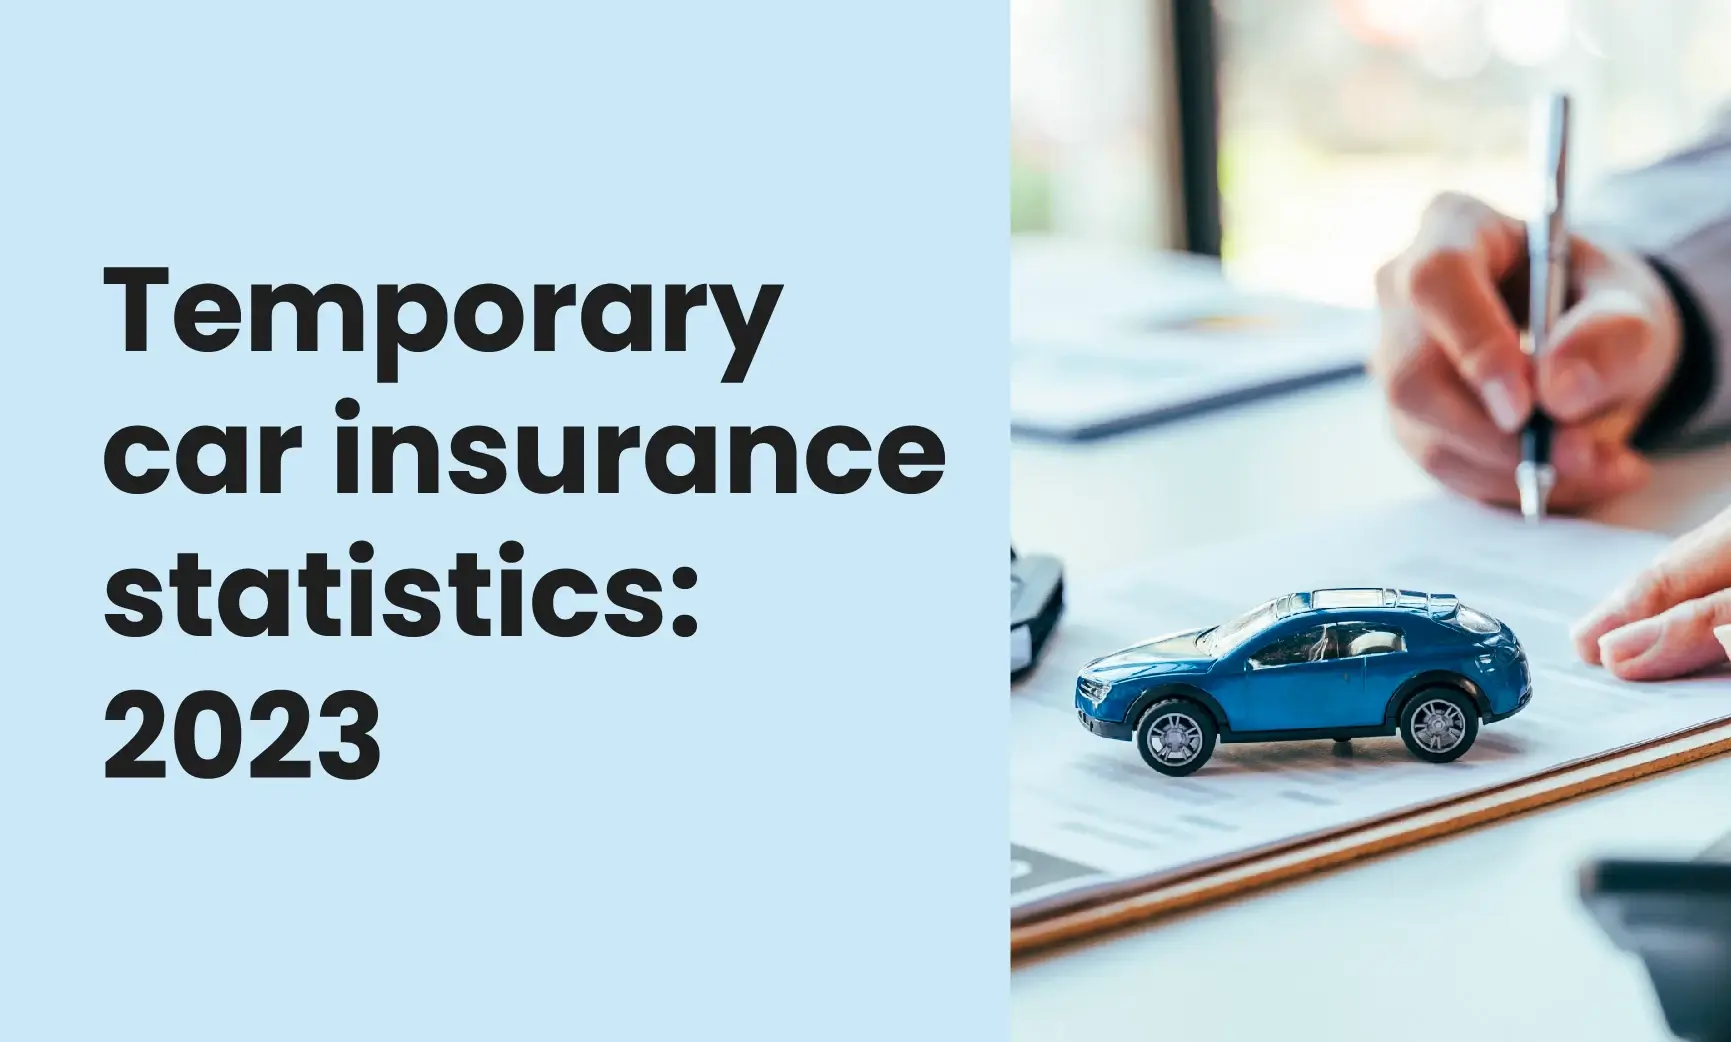 Image with the words 'Temporary car insurance statistics: 2023' alongside a picture of a toy car and someone filling out a form